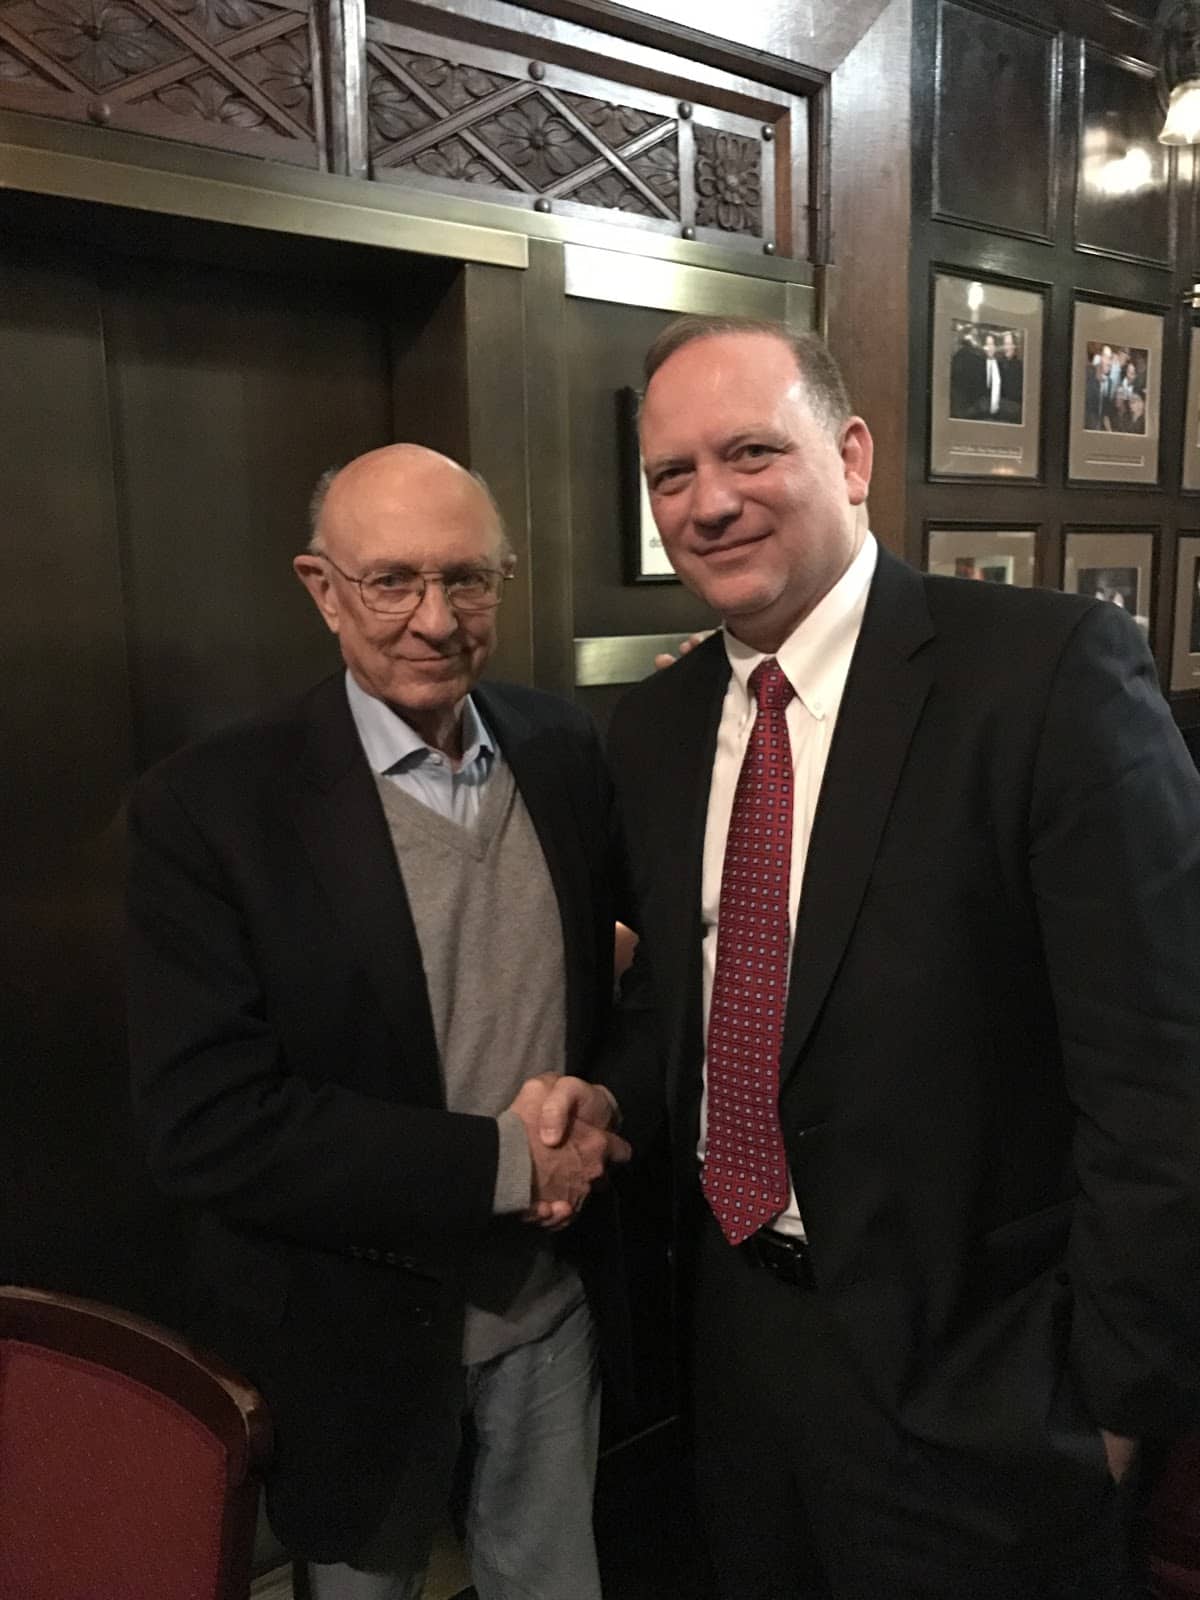 Former director of the CIA, Jim Woolsey, and Dr. Parker following discussions in New York.